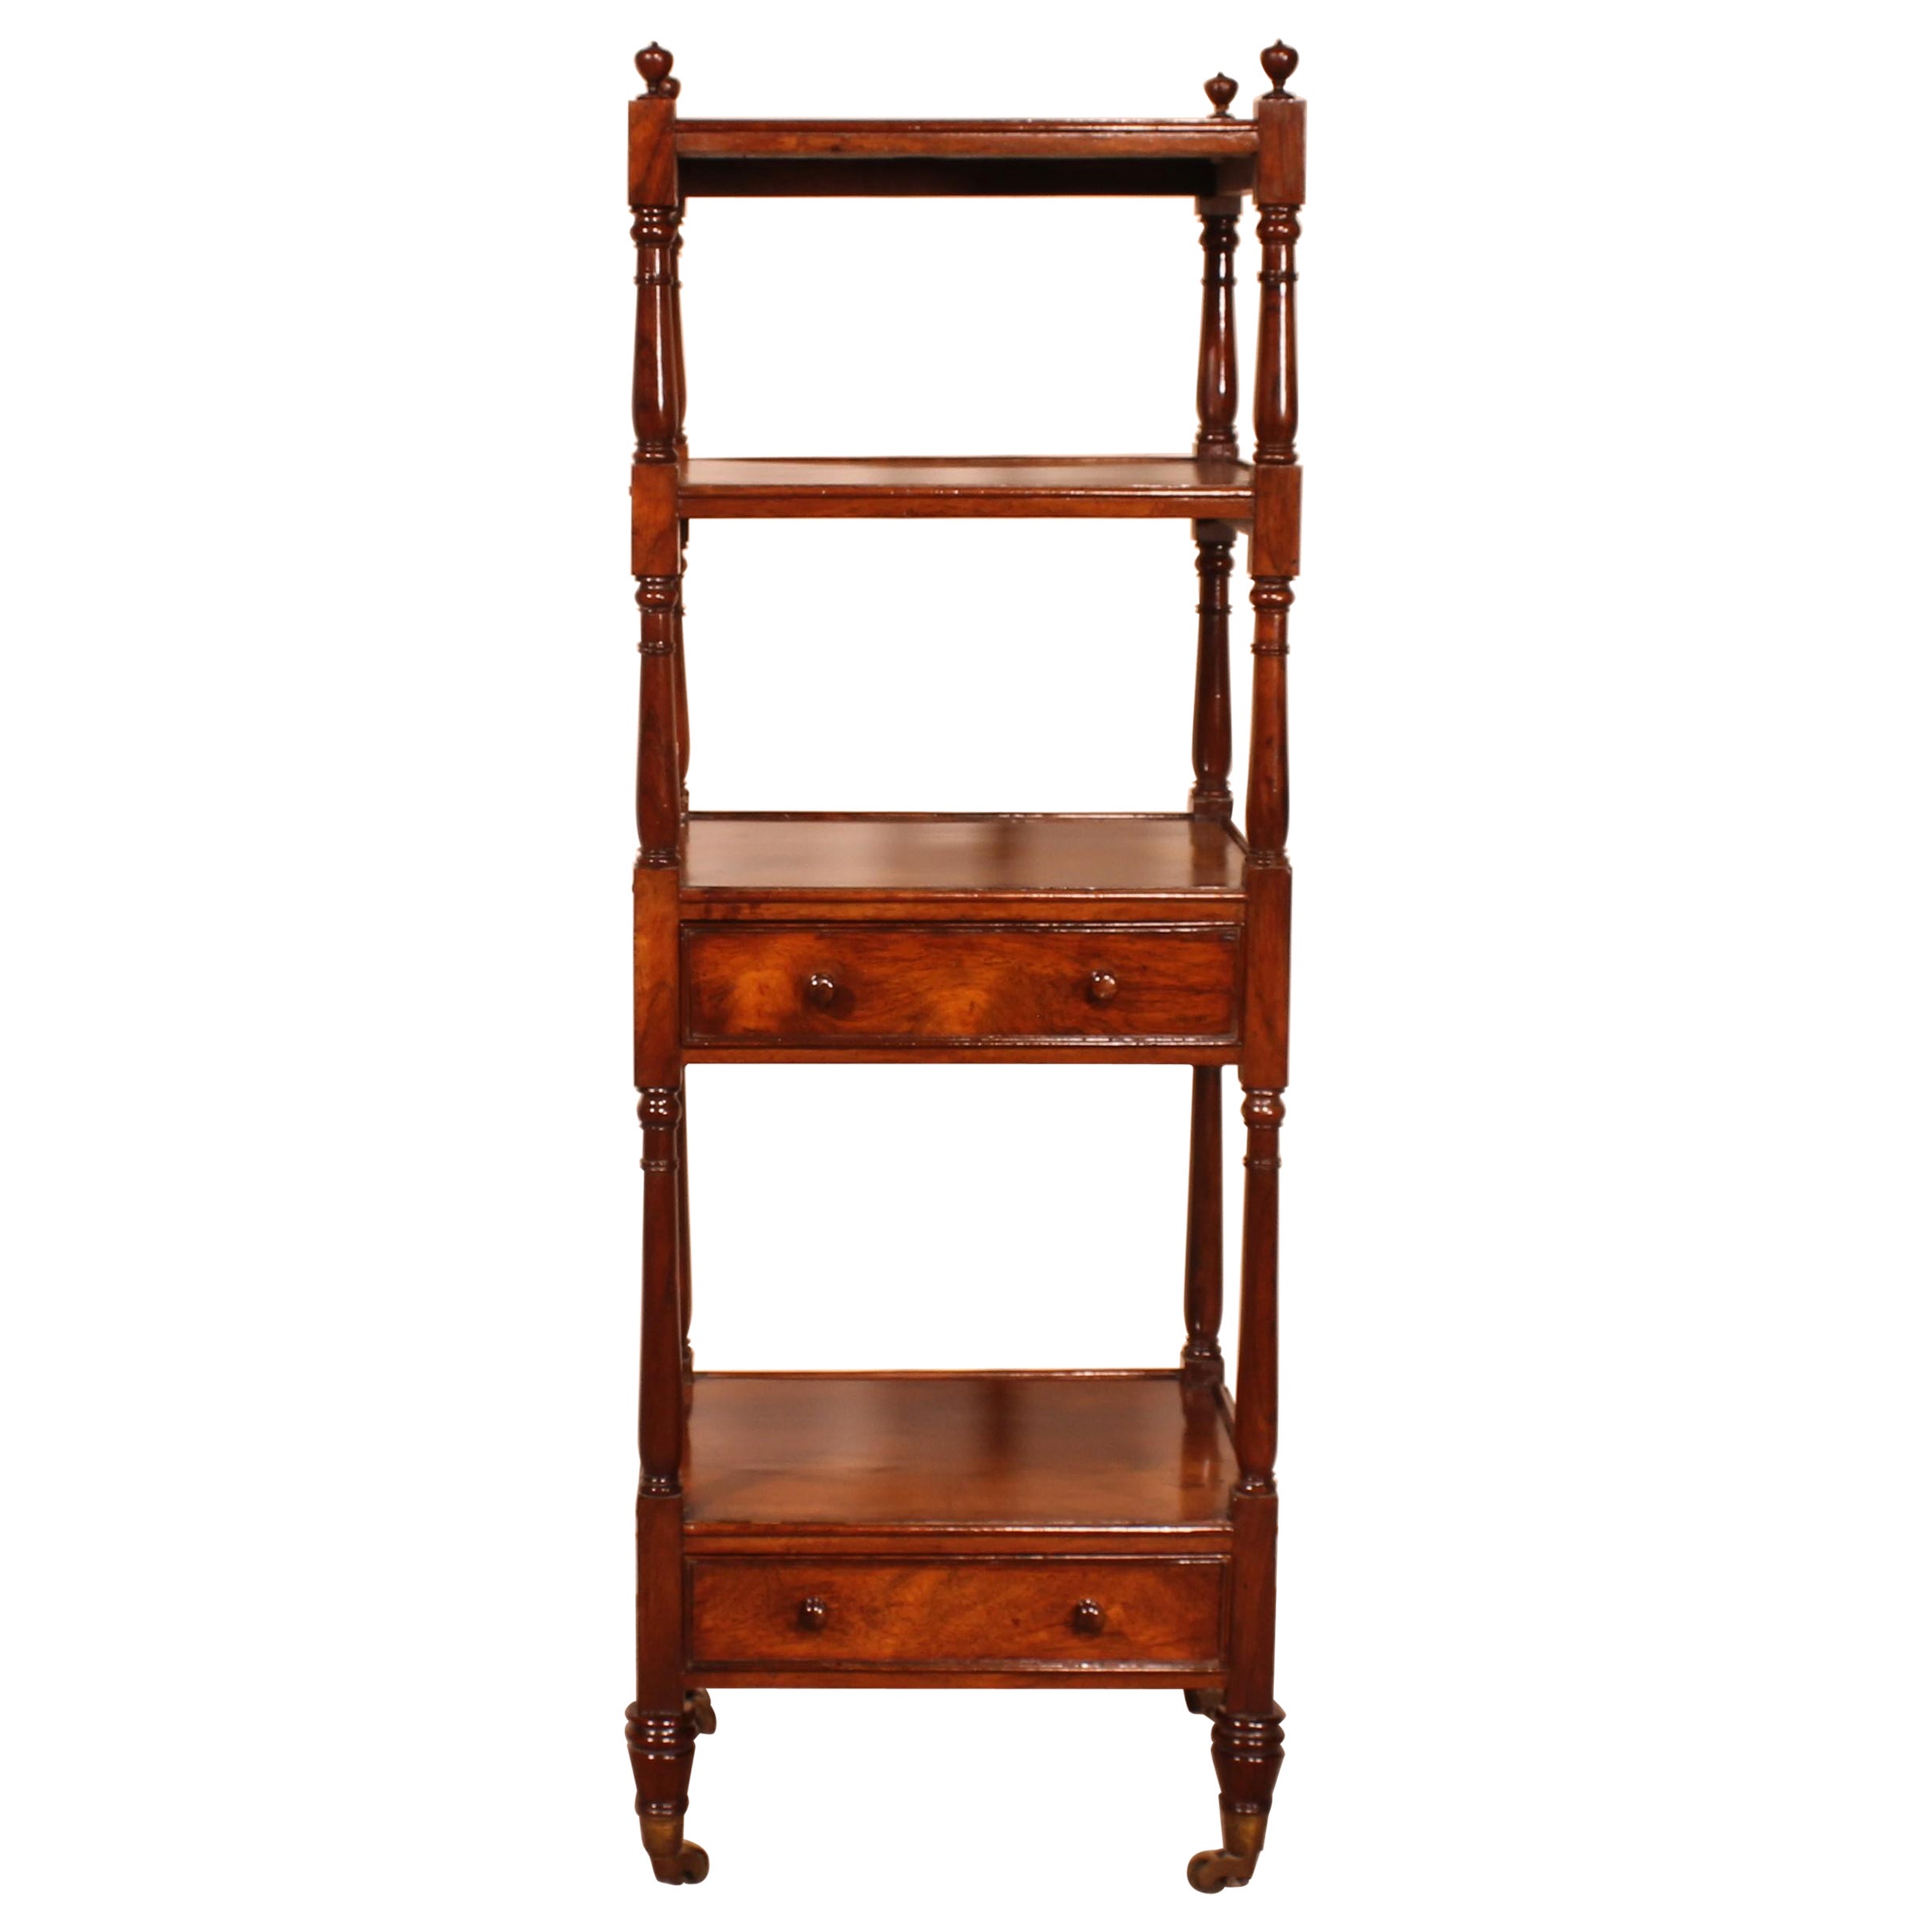 Rosewood Whatnot Or Shelf From 19th Century - England